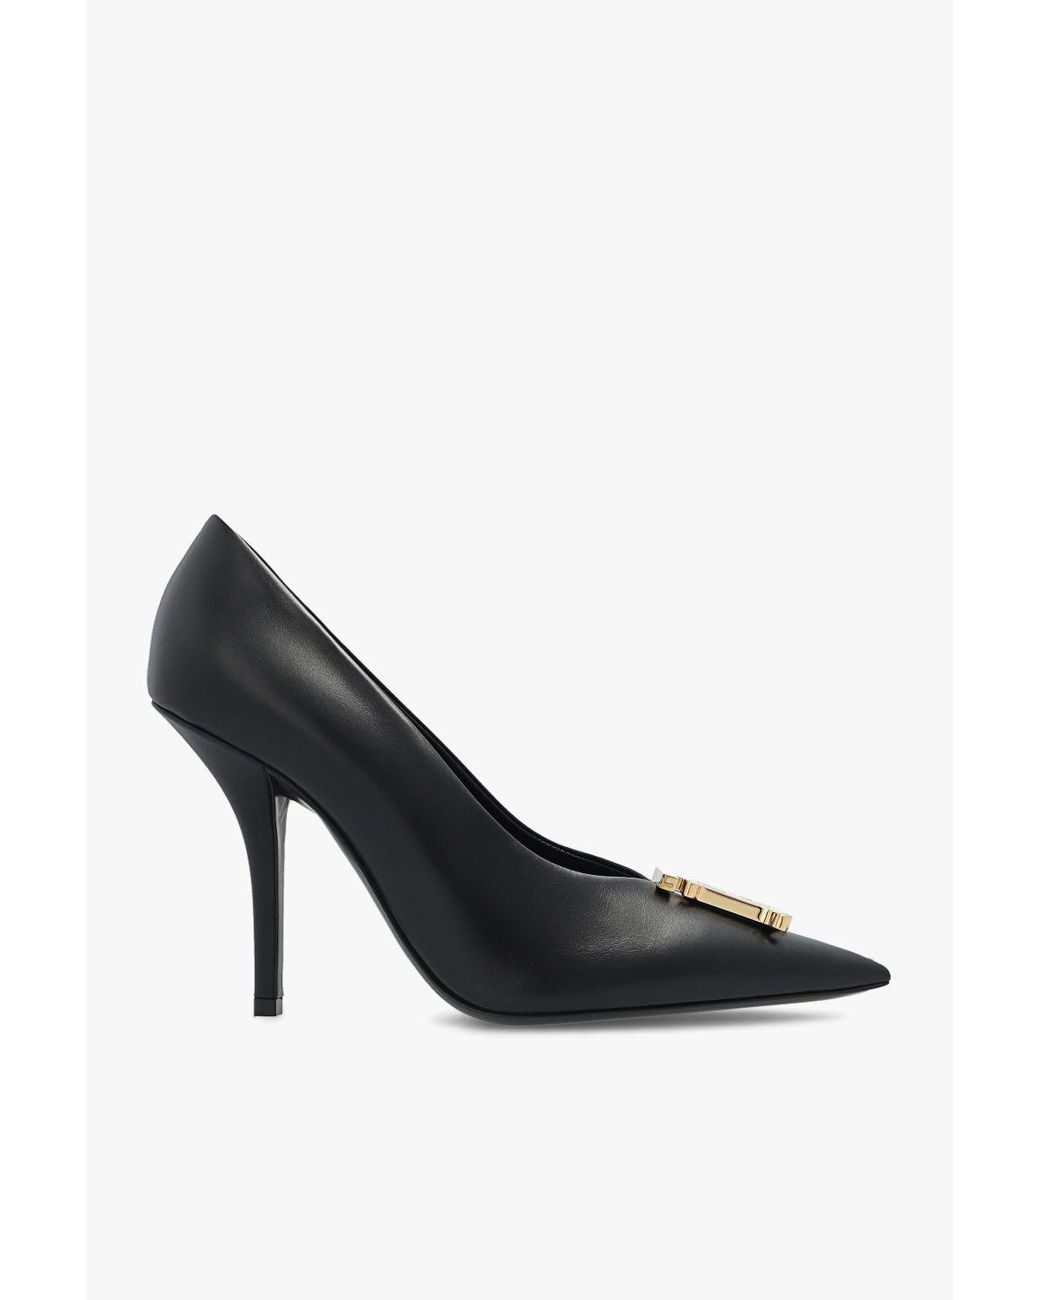 Burberry 'madelina' Stiletto Pumps in Black | Lyst